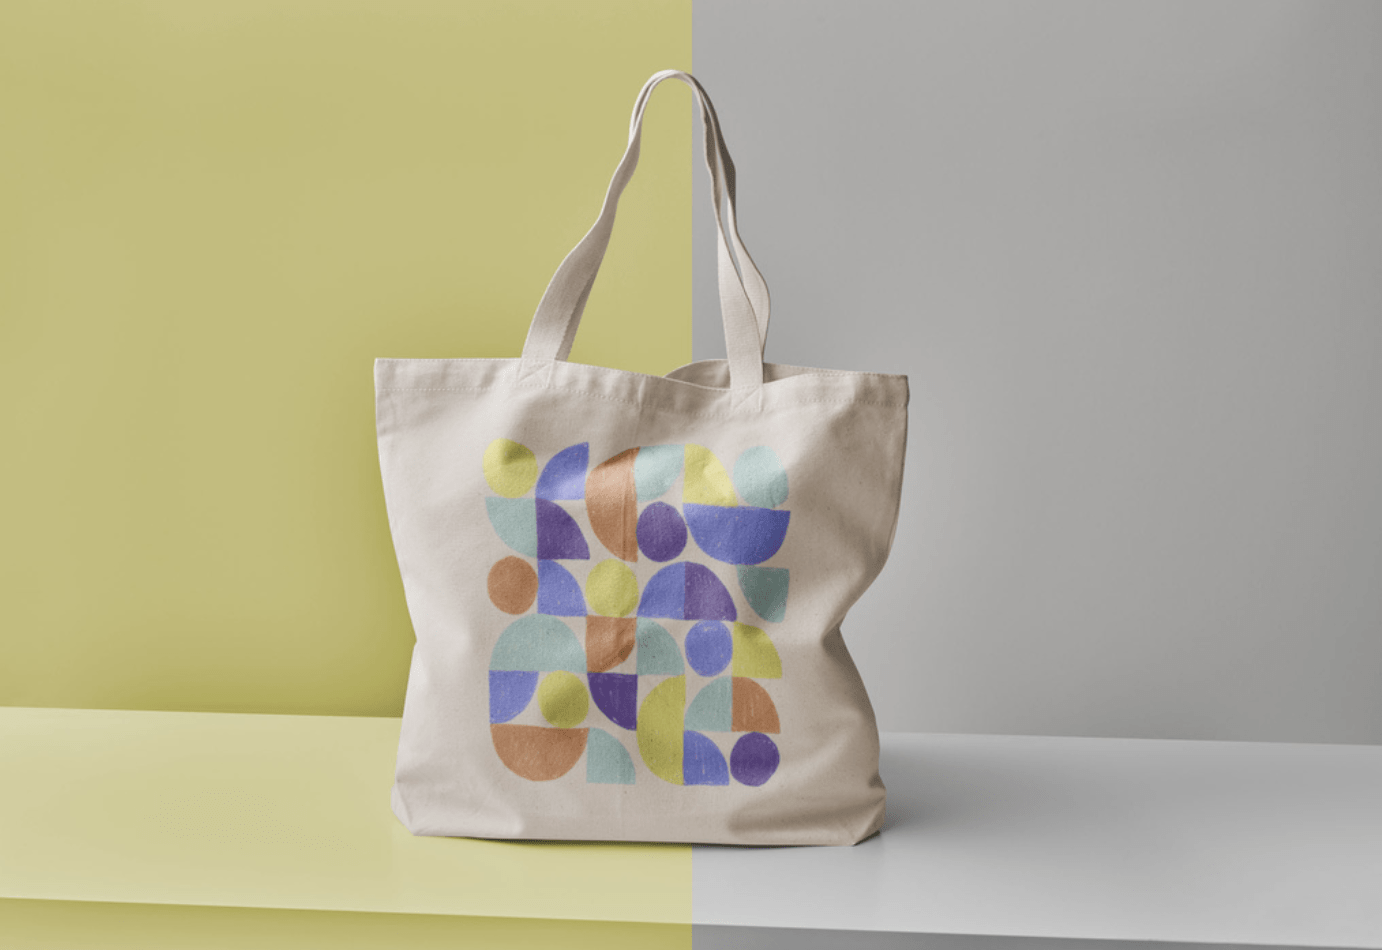 Tote Bag Mockup - Free High Quality PSD for Designers